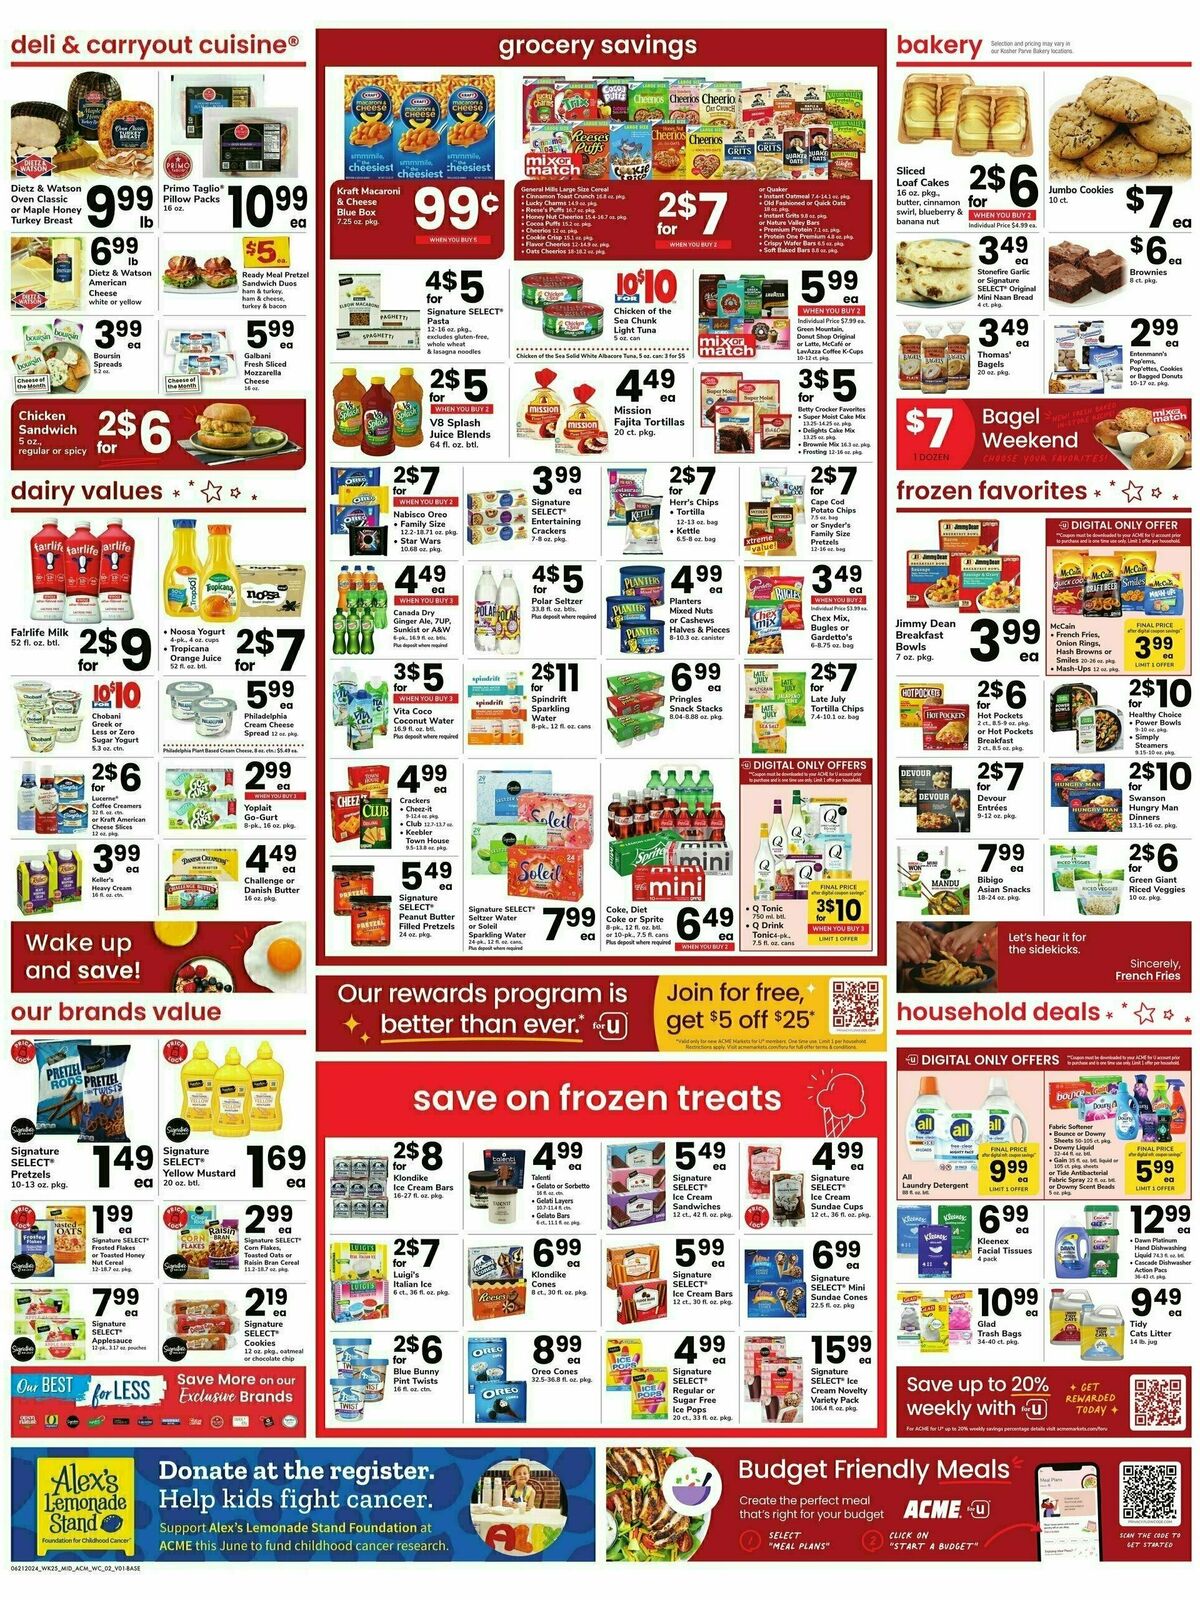 ACME Markets Weekly Ad from June 21